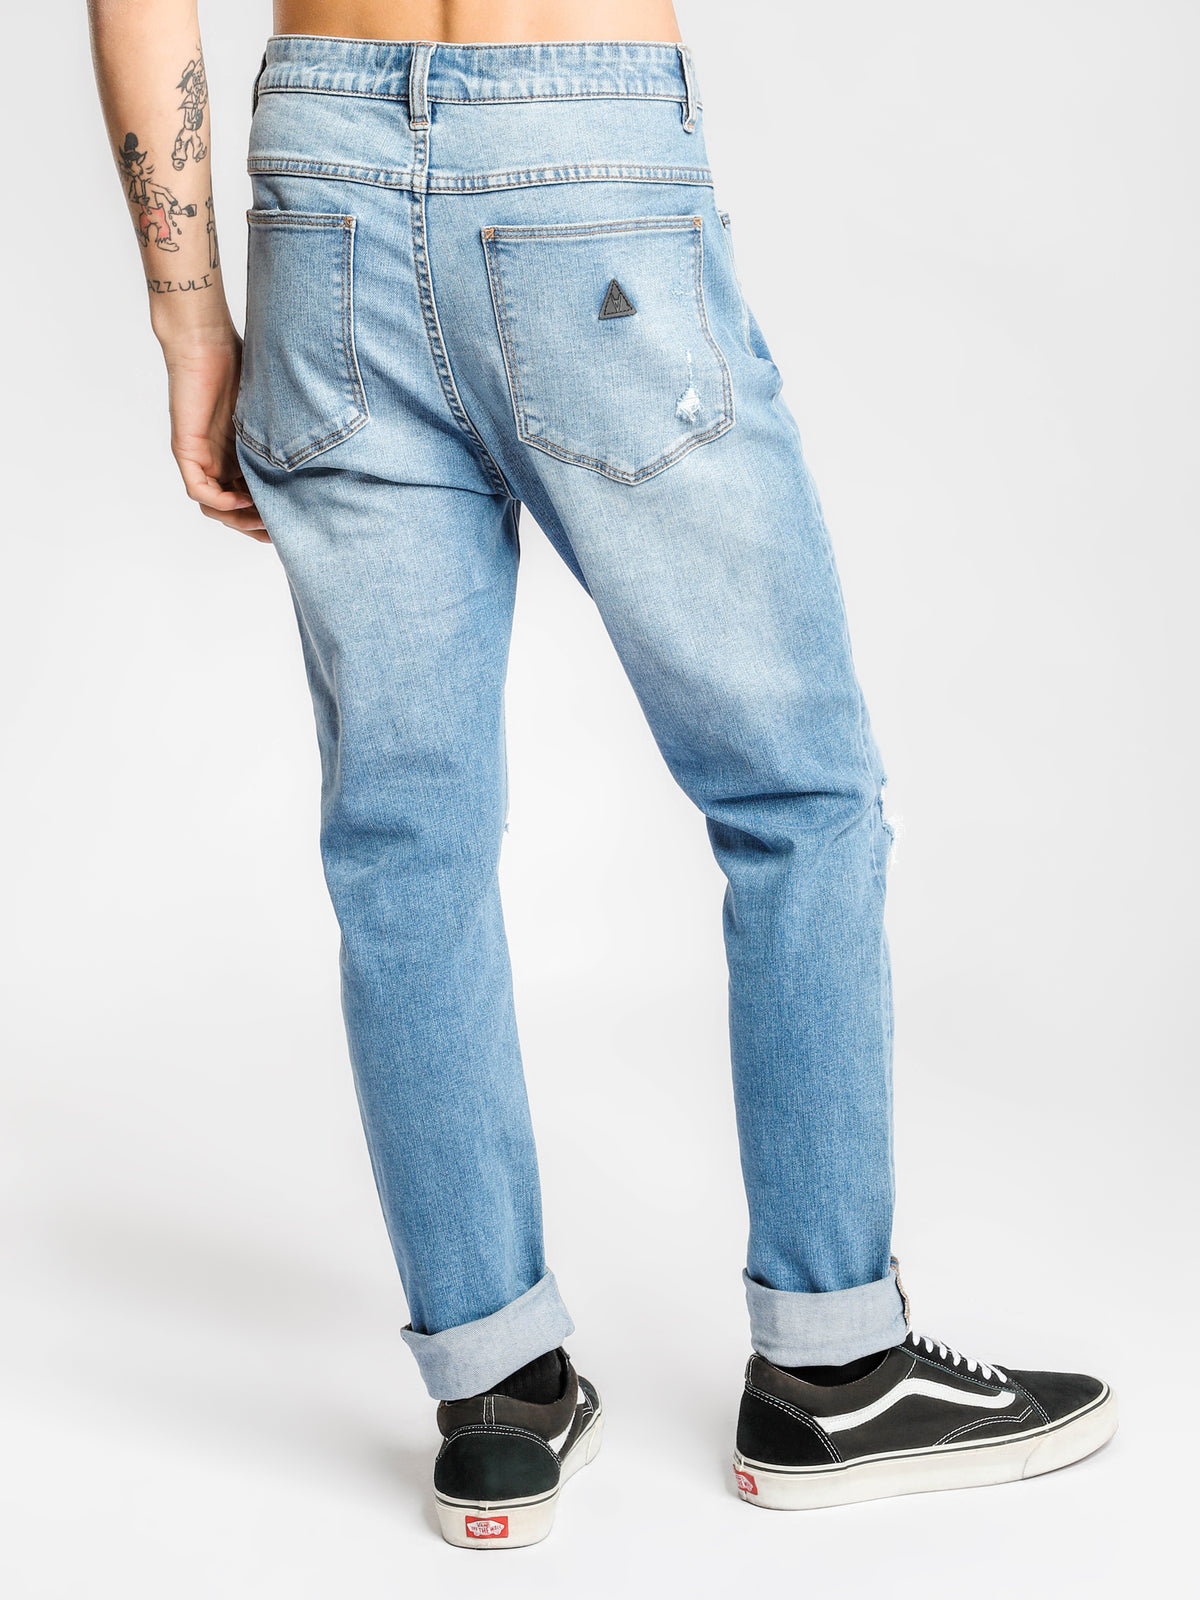 A Dropped Skinny Turn Up Jeans in Chalk Indigo